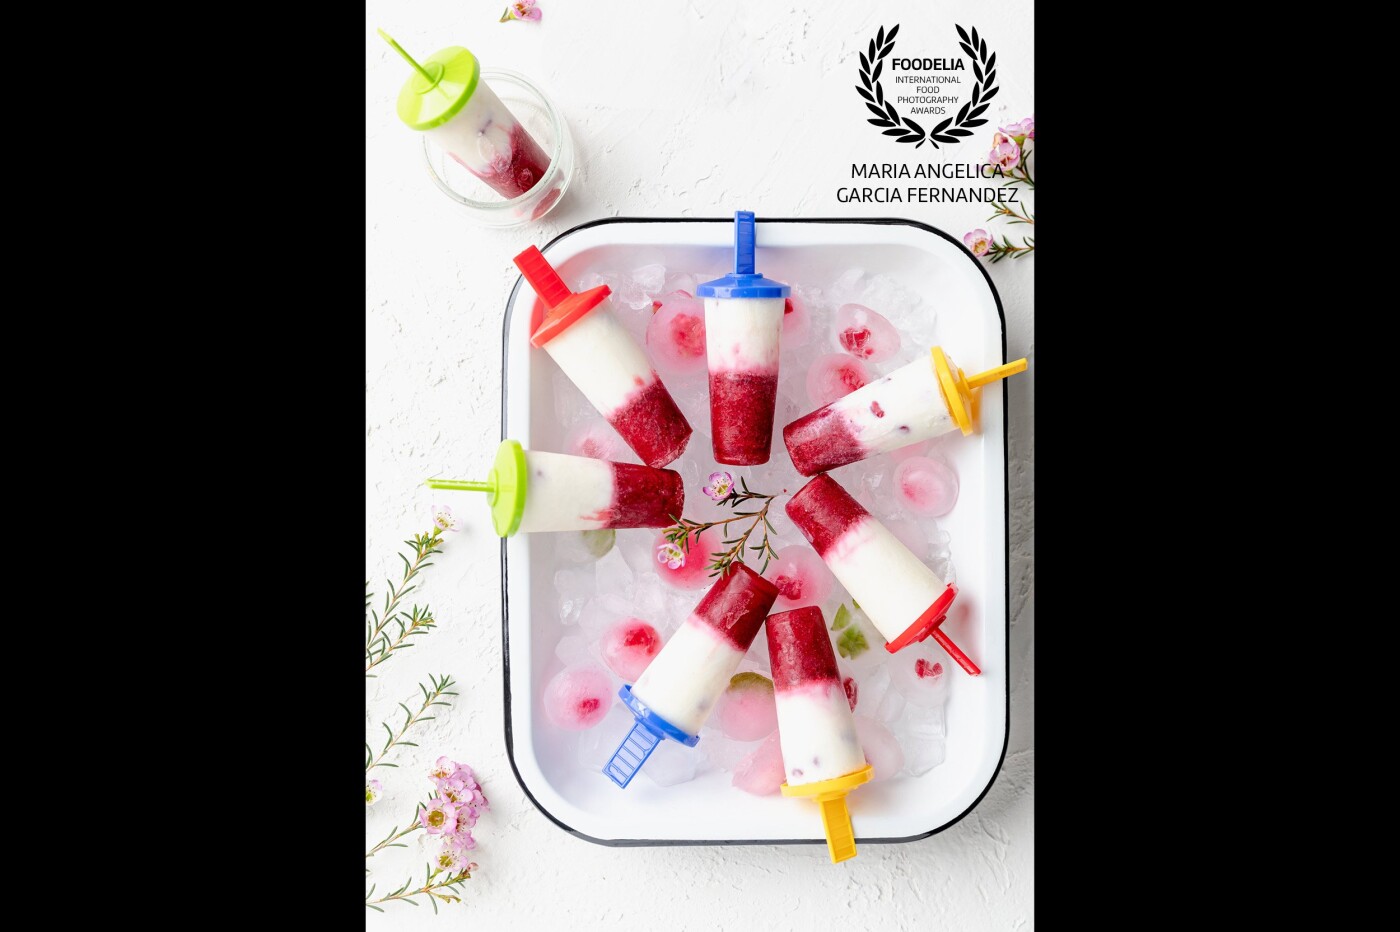 For this collection, I chose to shoot using a bright and Airy mood, minimalist props..trying to achieve a fresh look for summer. I used my new handmade textured background to shoot the Homemade popsicles, that by the way are a favorite dessert for so many as temperatures go high in summer. 